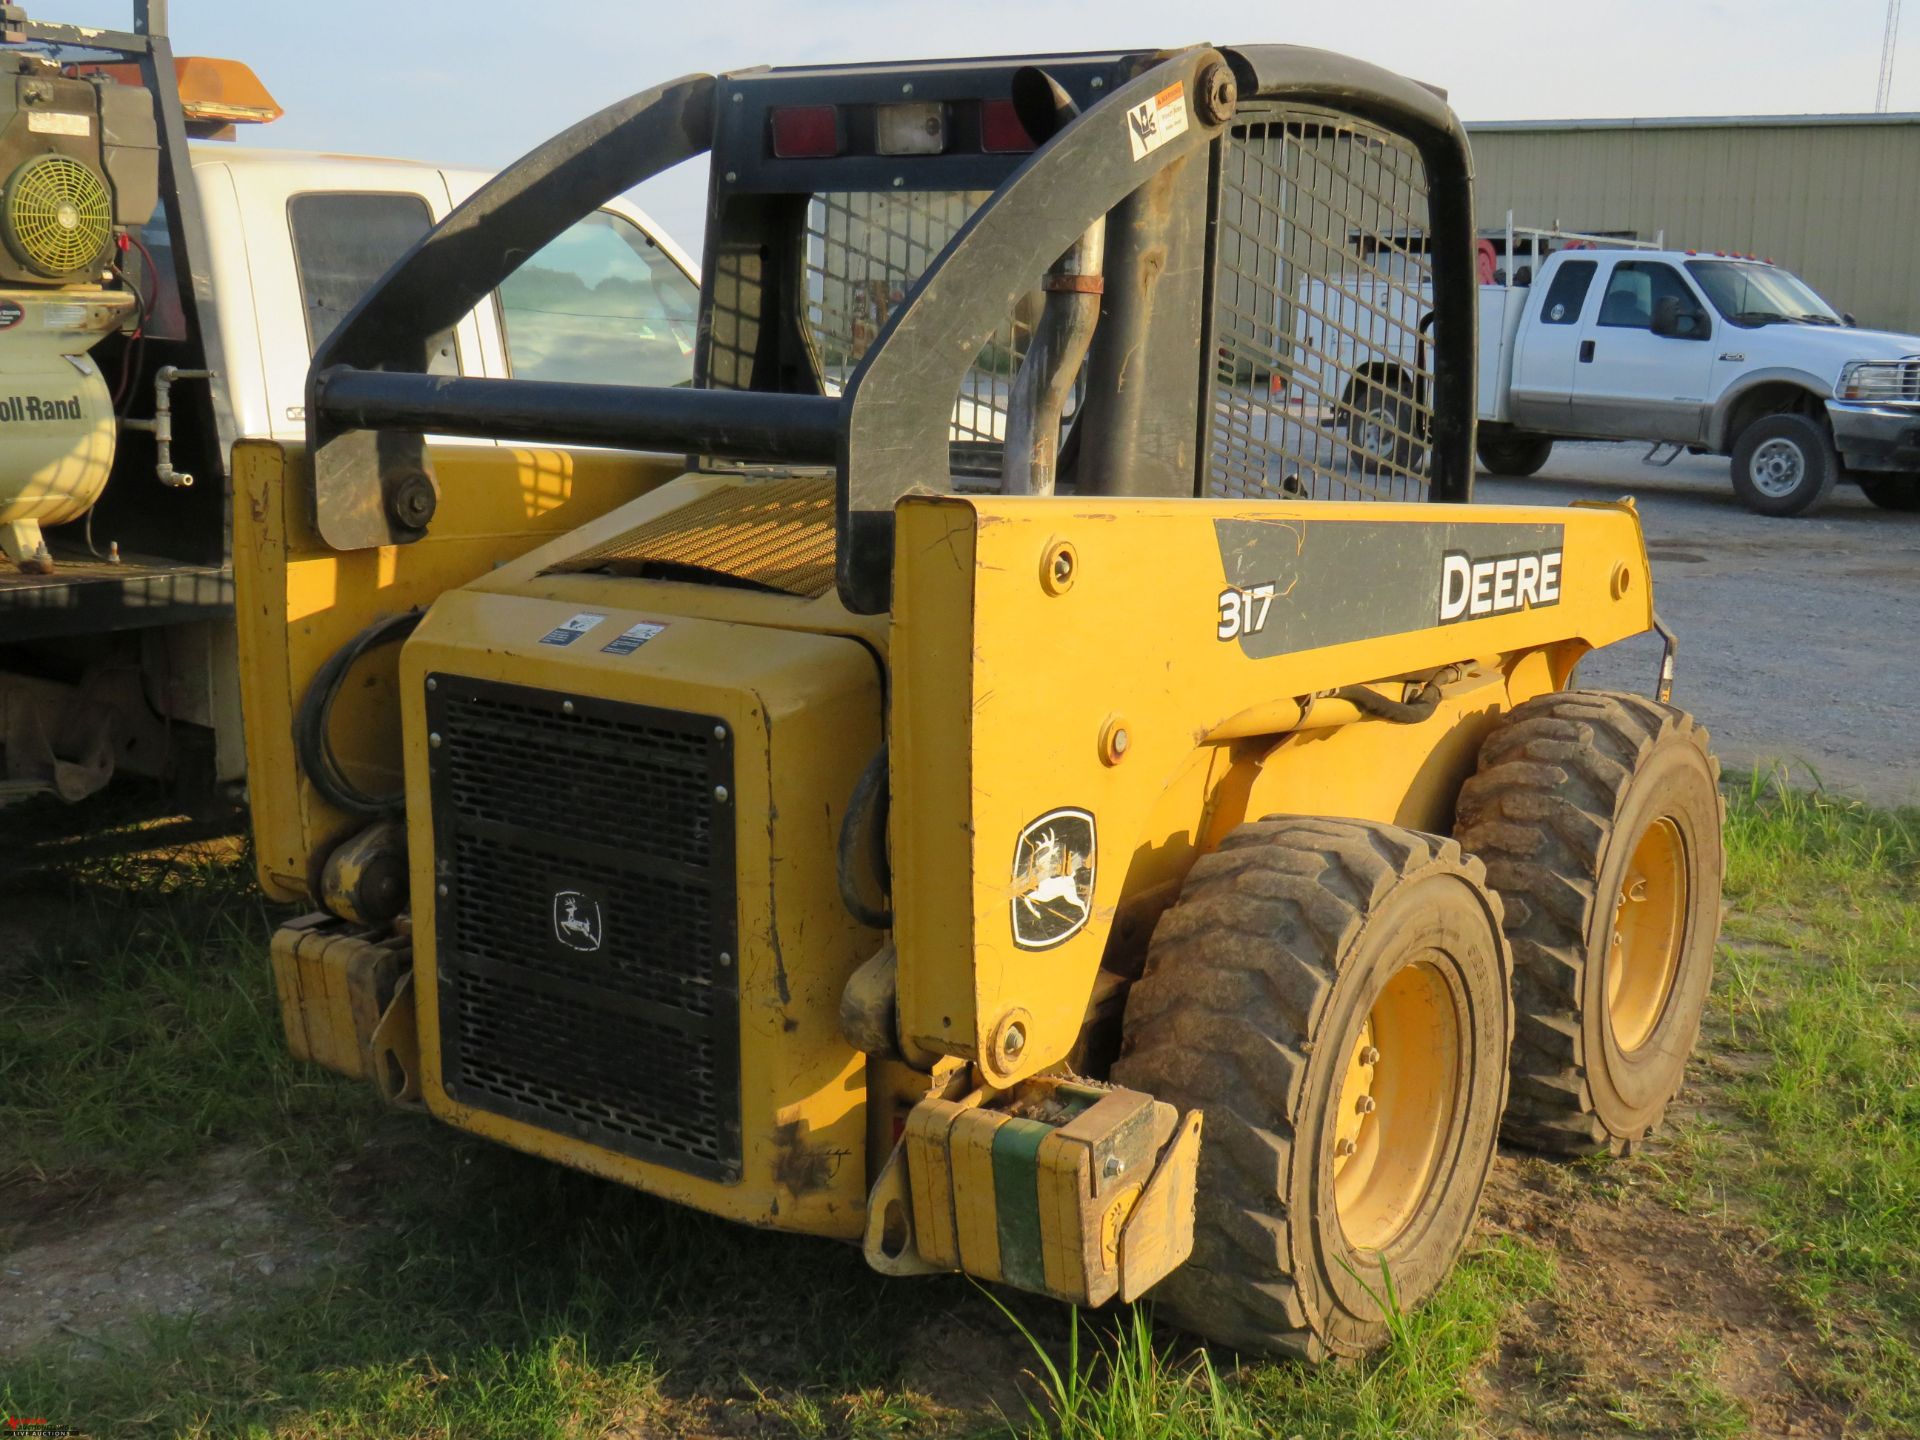 JOHN DEERE 317 RUBBER TIRE SKID STEER, AUXILIARY HYDRAULICS, 12-16.5 TIRES, REAR WEIGHTS, 2972 HOURS - Image 2 of 6